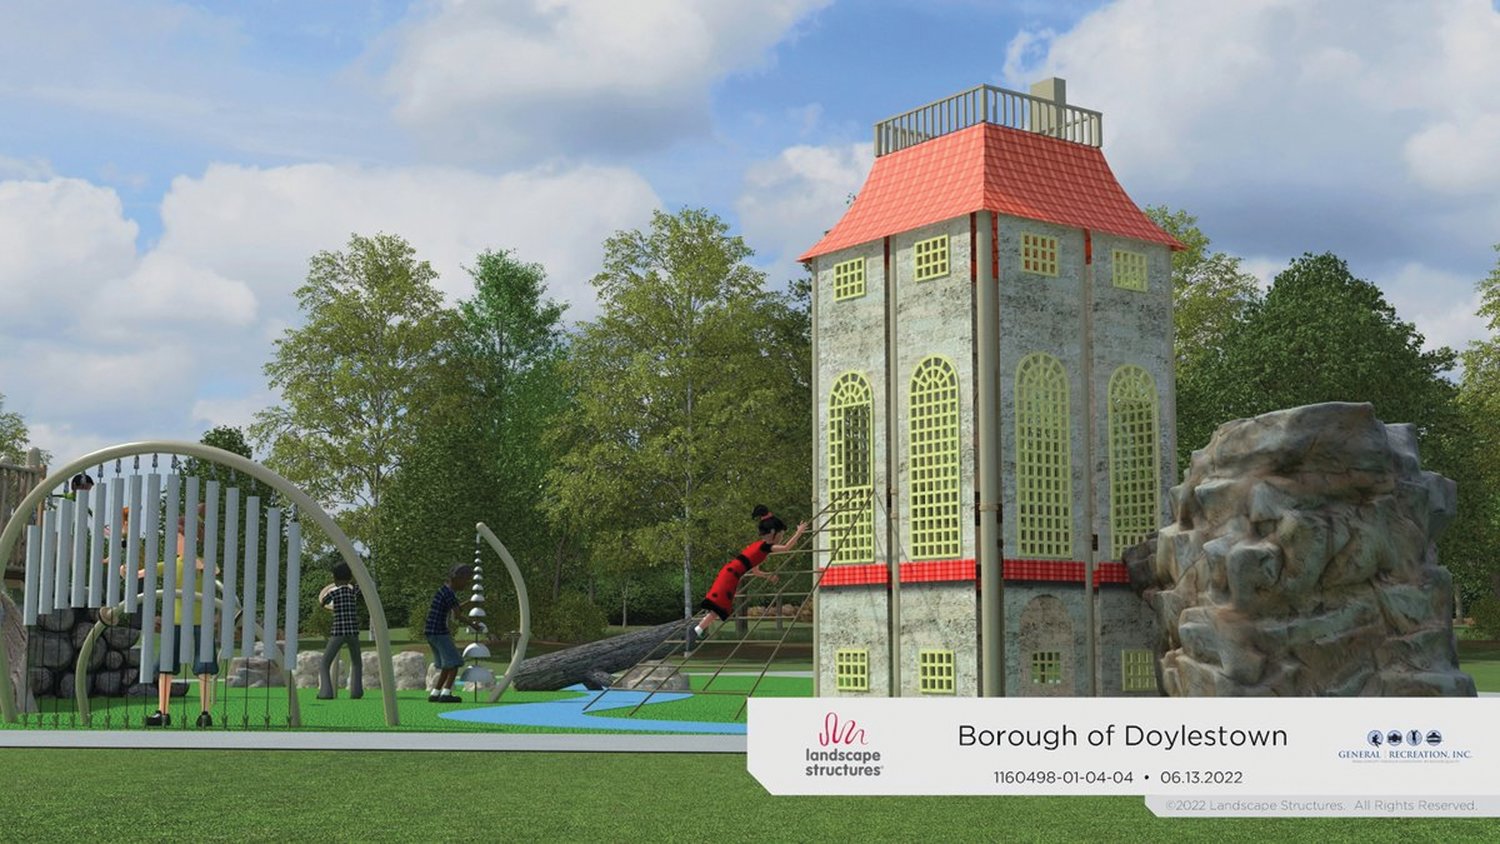 Plans for a Fonthill-themed playground at Doylestown Borough’s Broad Commons Park are progressing.